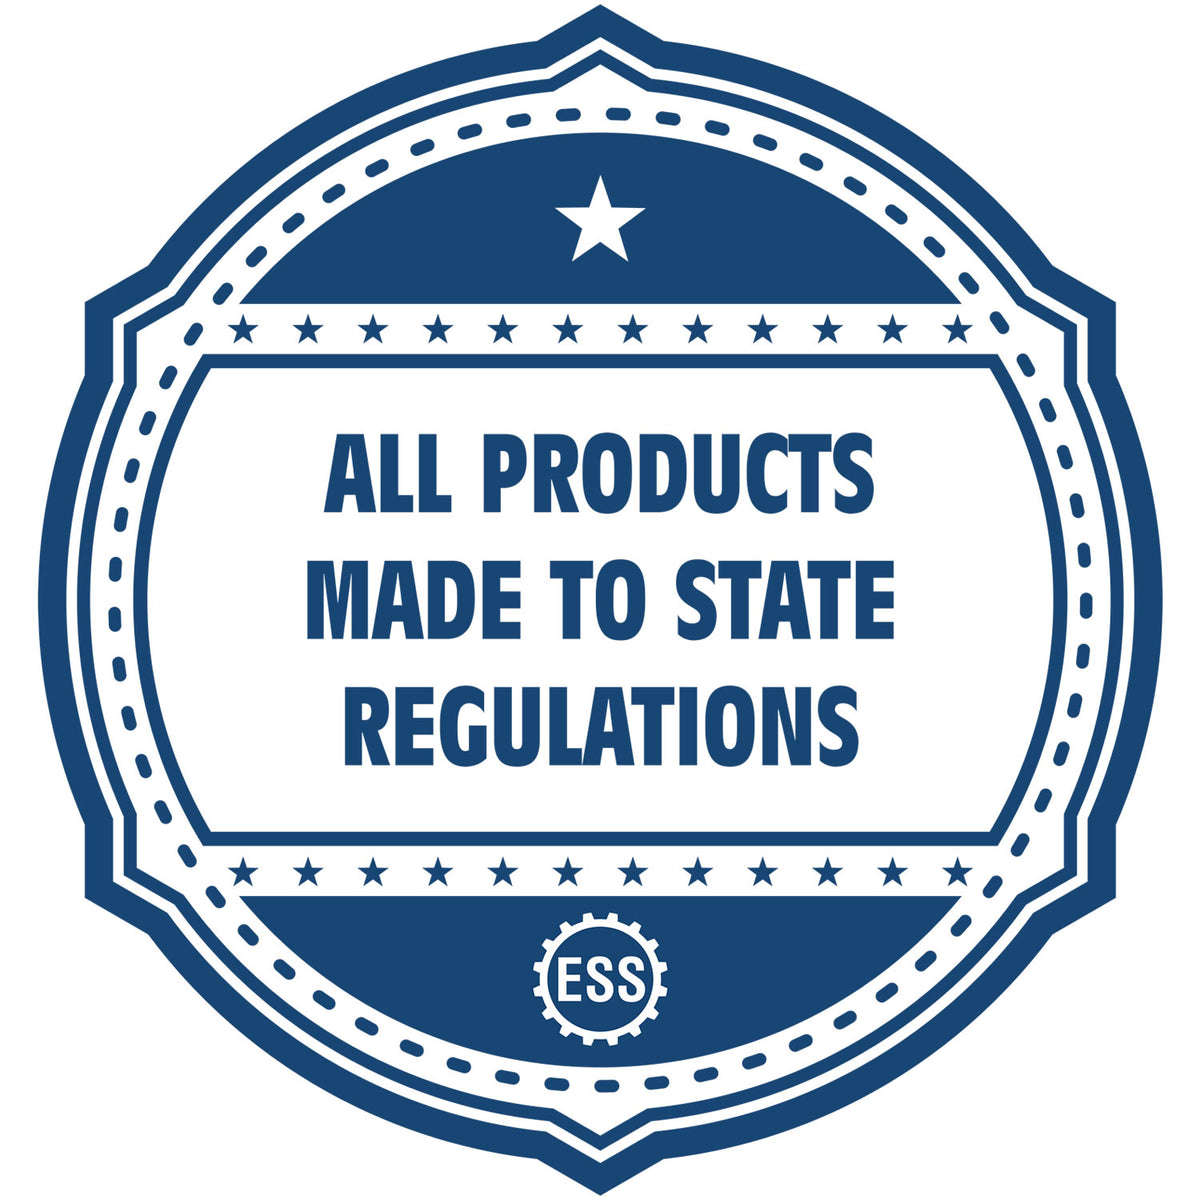 An icon or badge element for the Handheld Missouri Architect Seal Embosser showing that this product is made in compliance with state regulations.